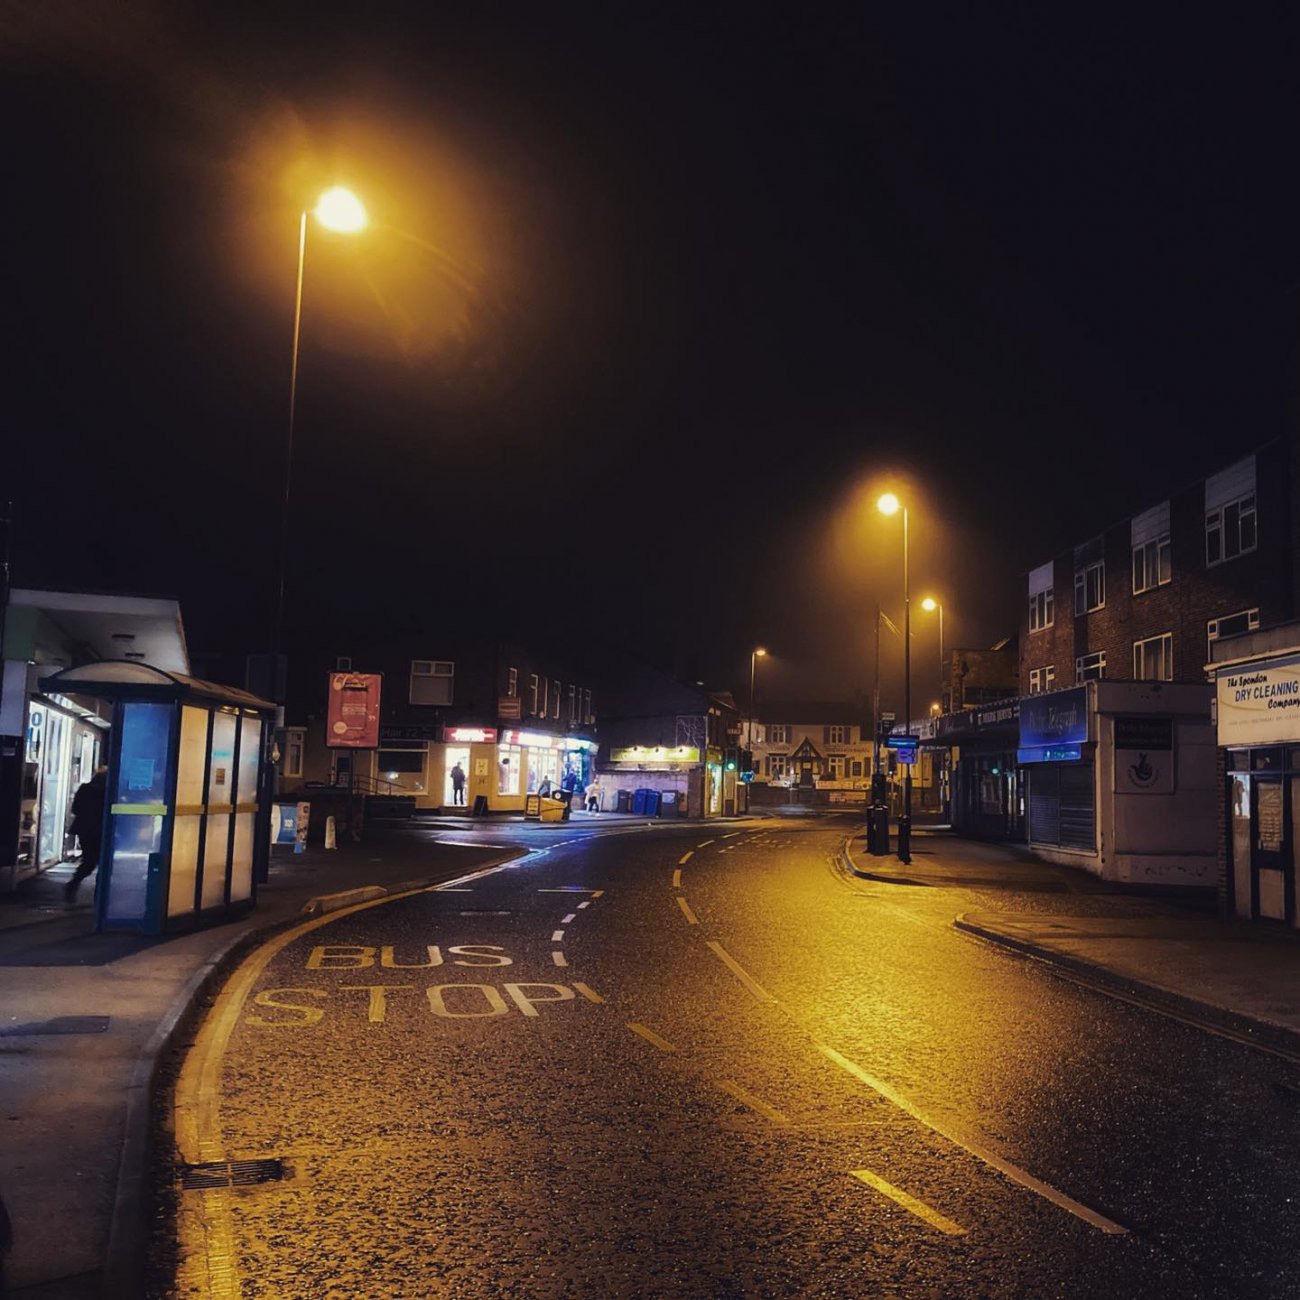 Photograph of Sitwell Street at night